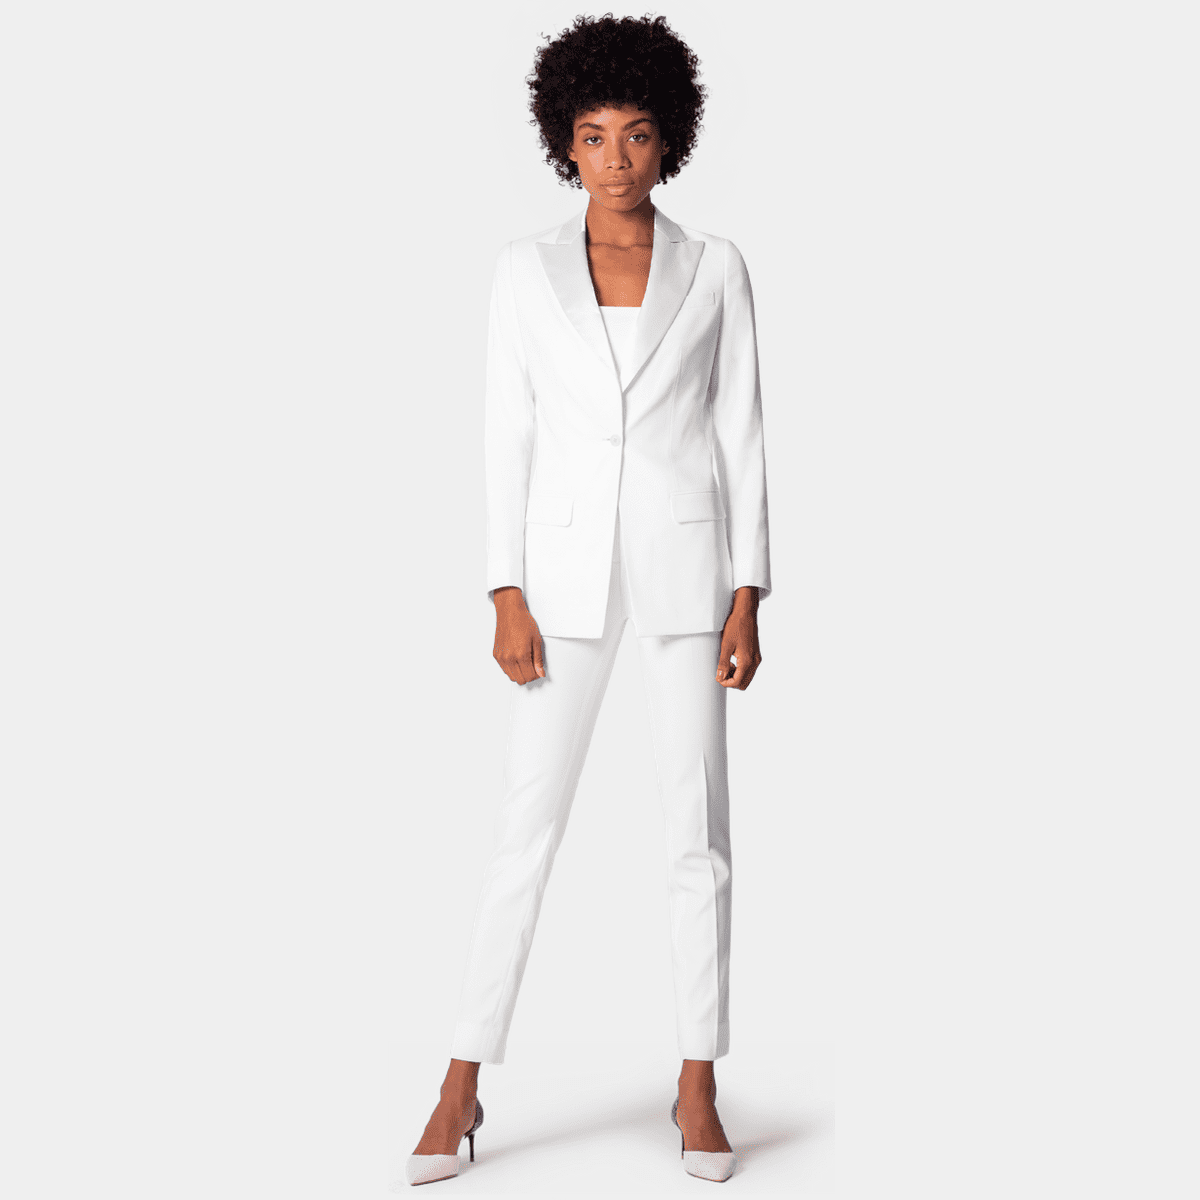 Custom Made Slim Fit White Womens Pant Suit For Formal Office And Evening  Wear Dress Mom Tuxedo Jacket And Pants From Foreverbridal, $73.76 |  DHgate.Com